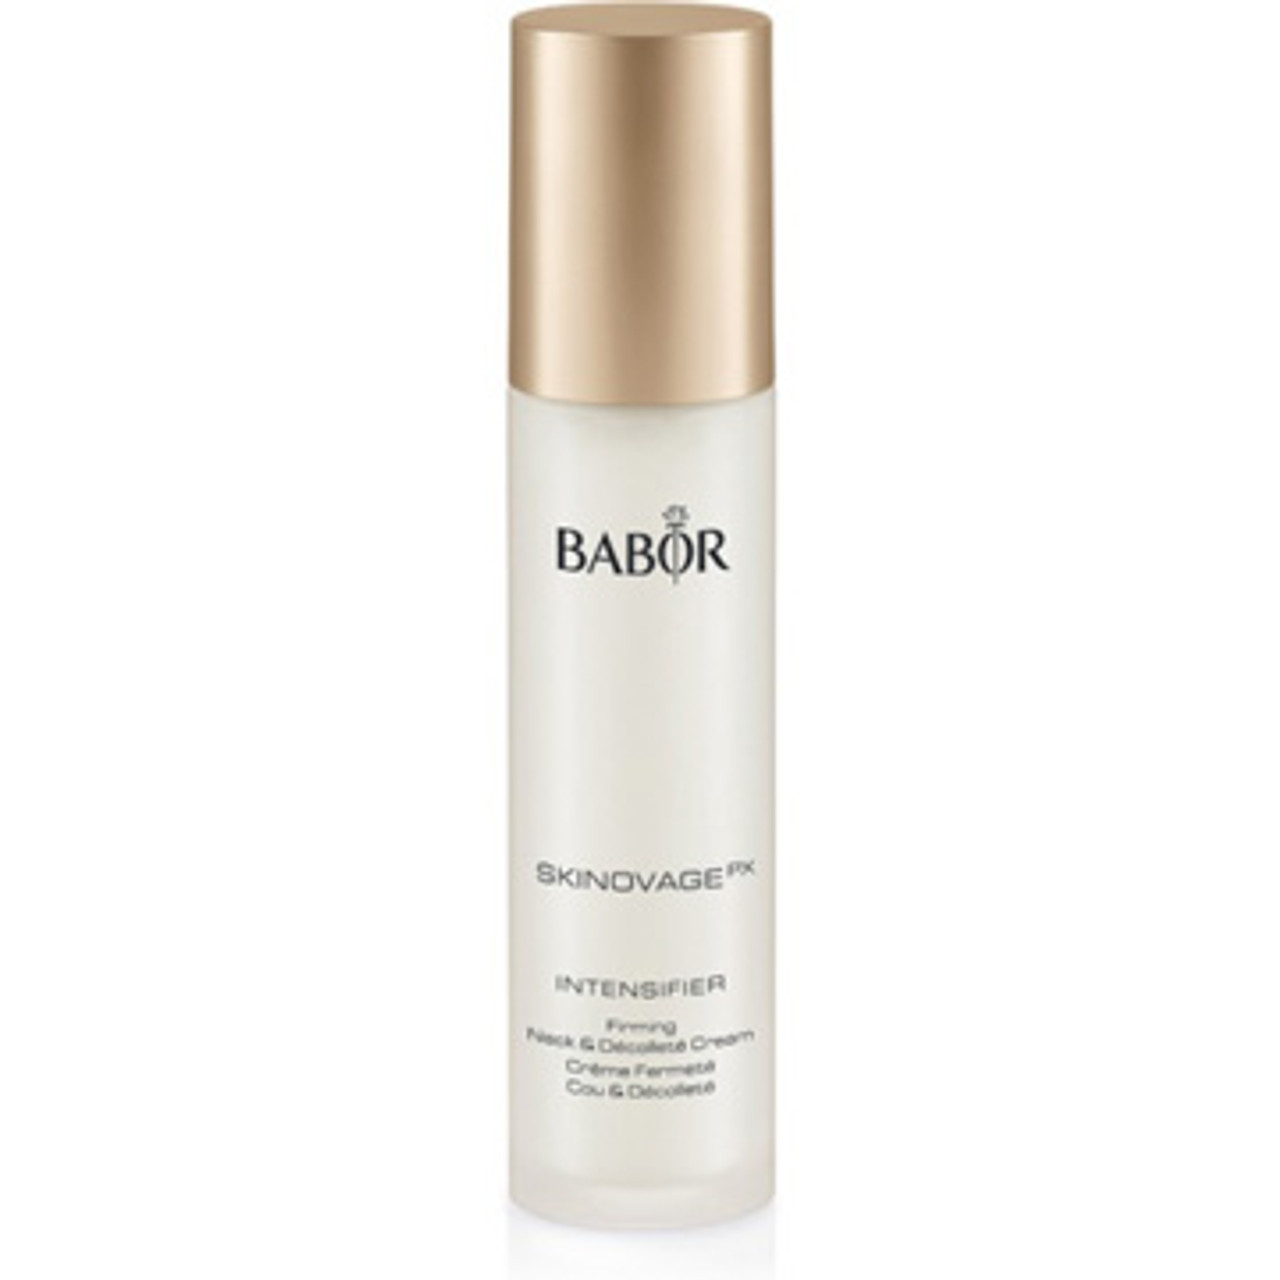 Babor Skinovage PX Intensifier Firming Neck and Decollete Cream - 1 3/4 oz (476900)